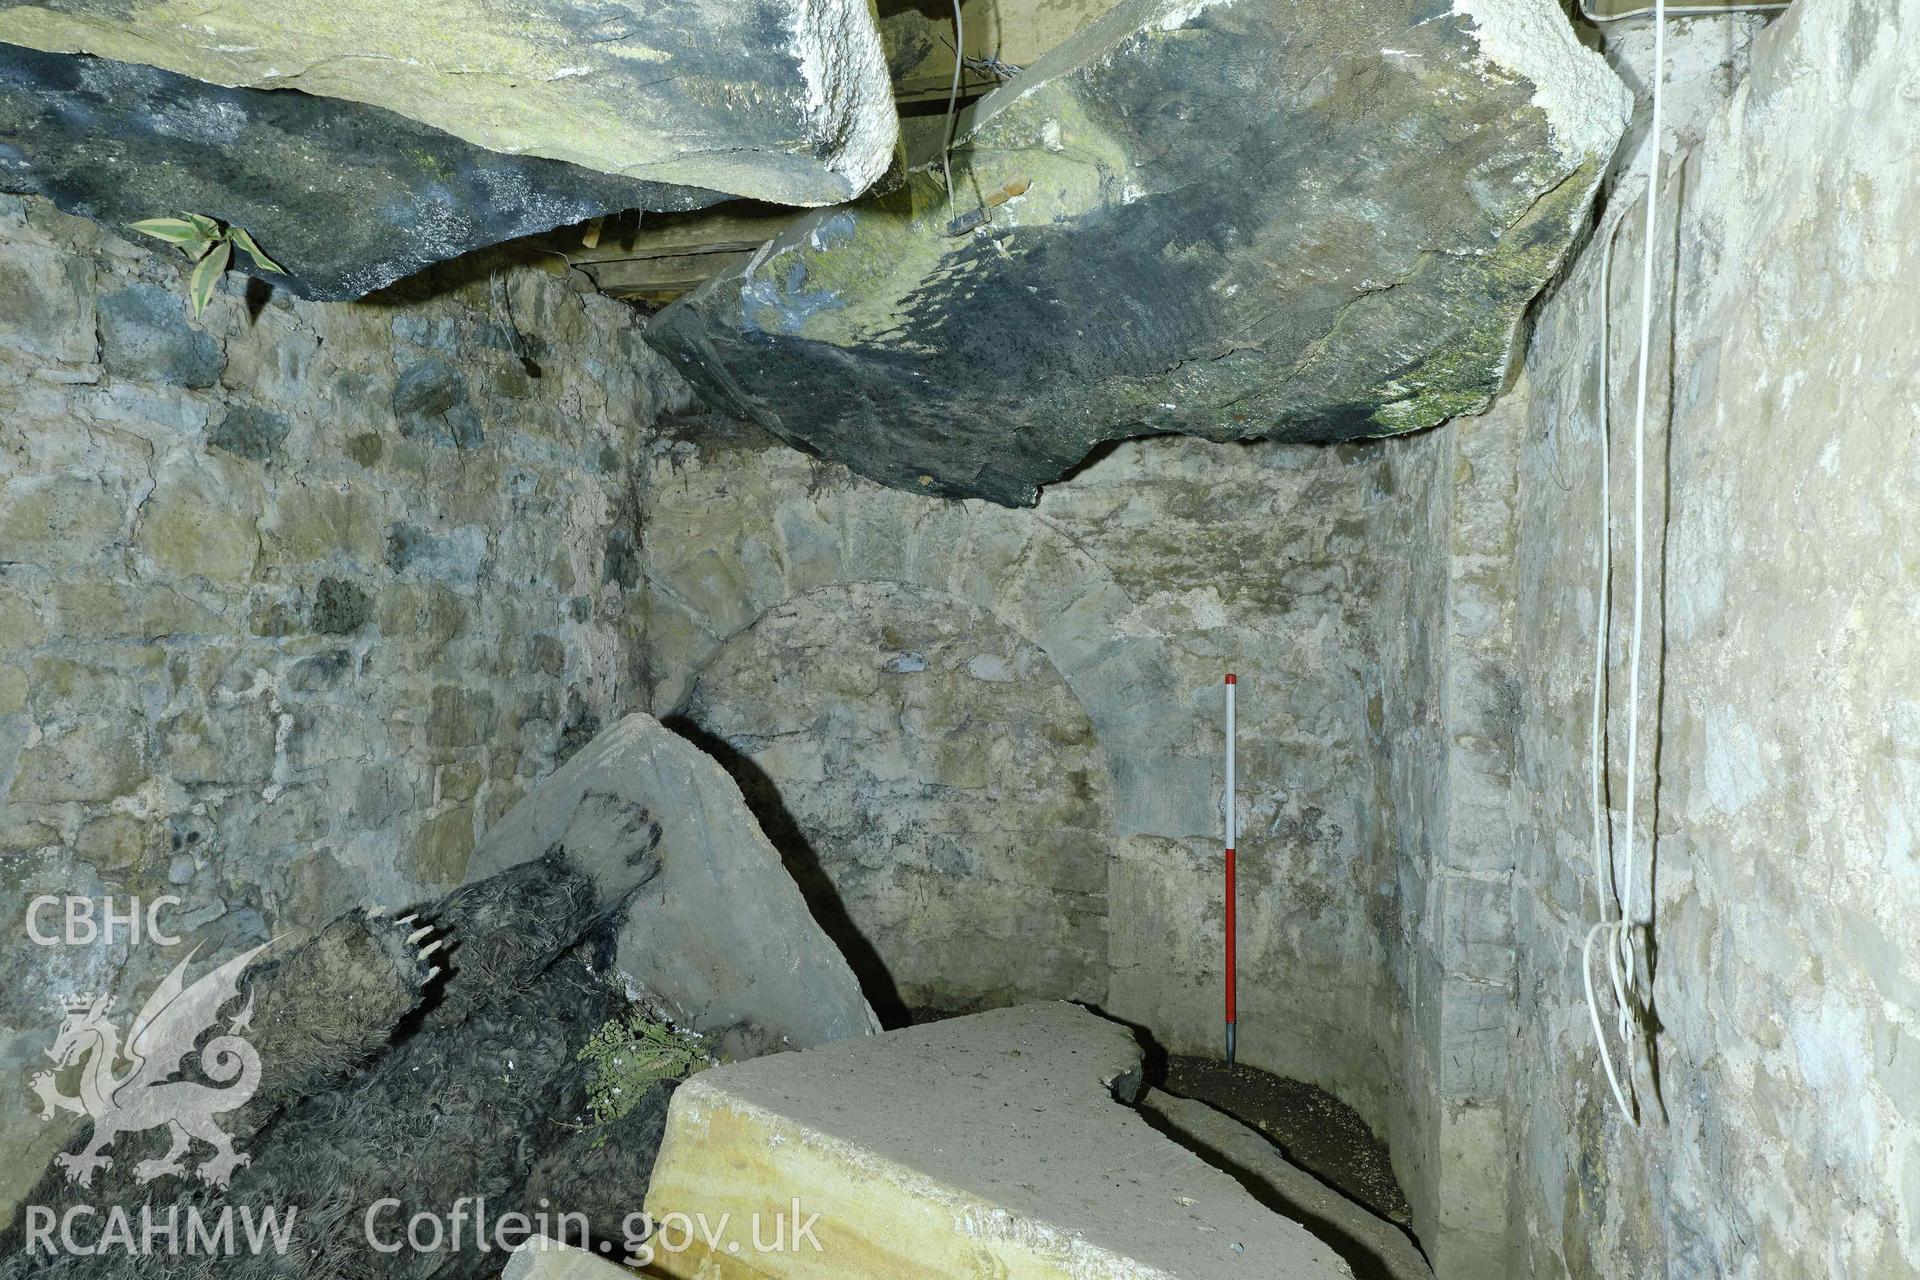 Colour photograph showing Blackpool Mill - basement, blocked arch from head race to secondary wheel pit, looking SE. Produced as part of Historic Building Recording for Blackpool Mill, carried out by Richard Hayman, June 2021.